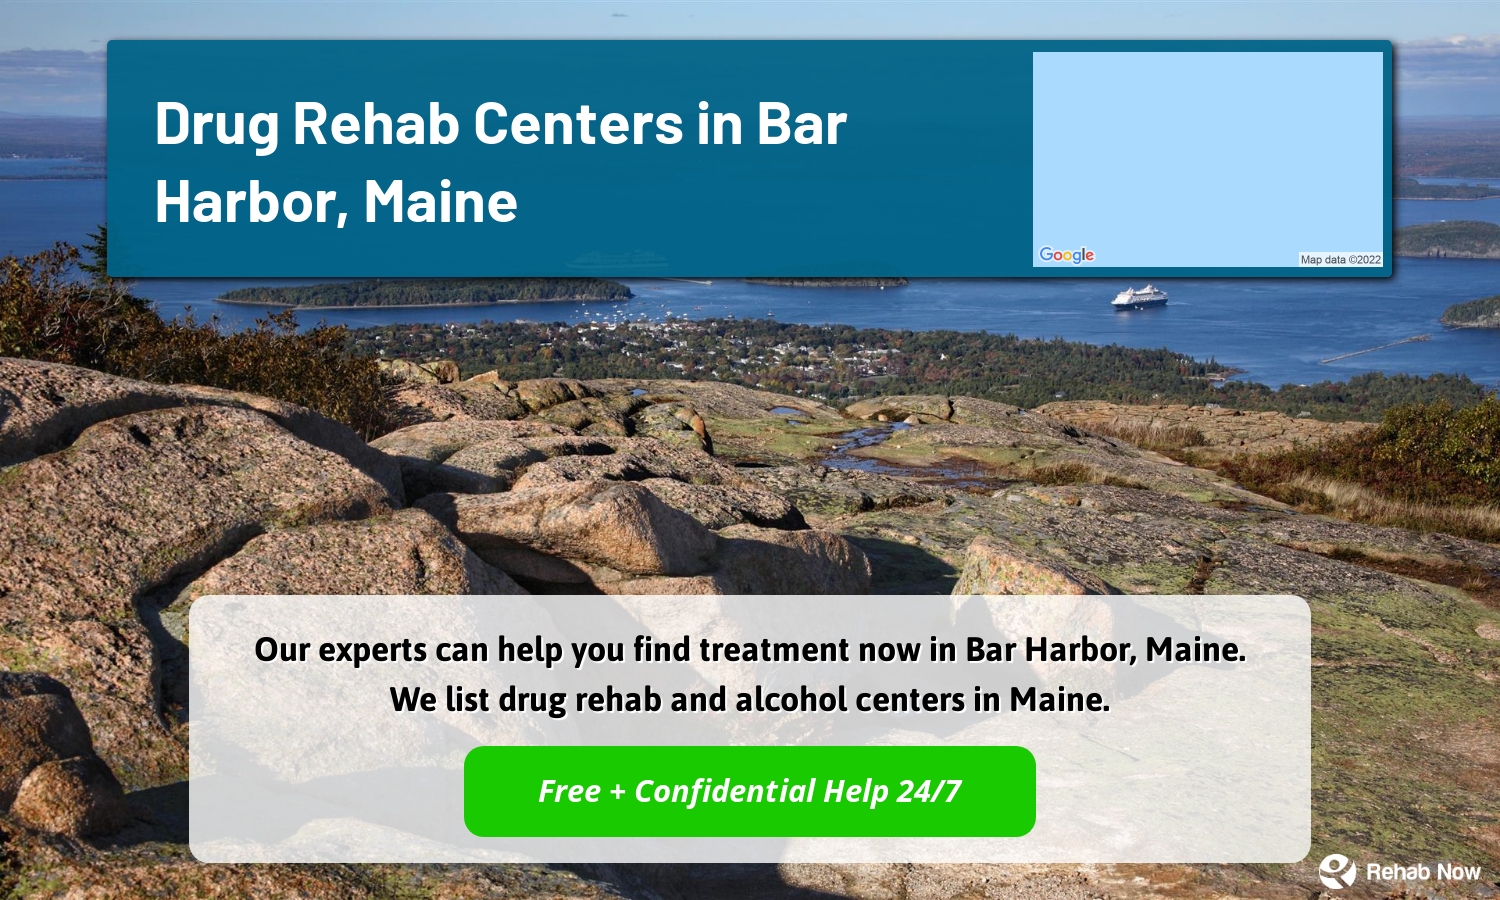 Our experts can help you find treatment now in Bar Harbor, Maine. We list drug rehab and alcohol centers in Maine.